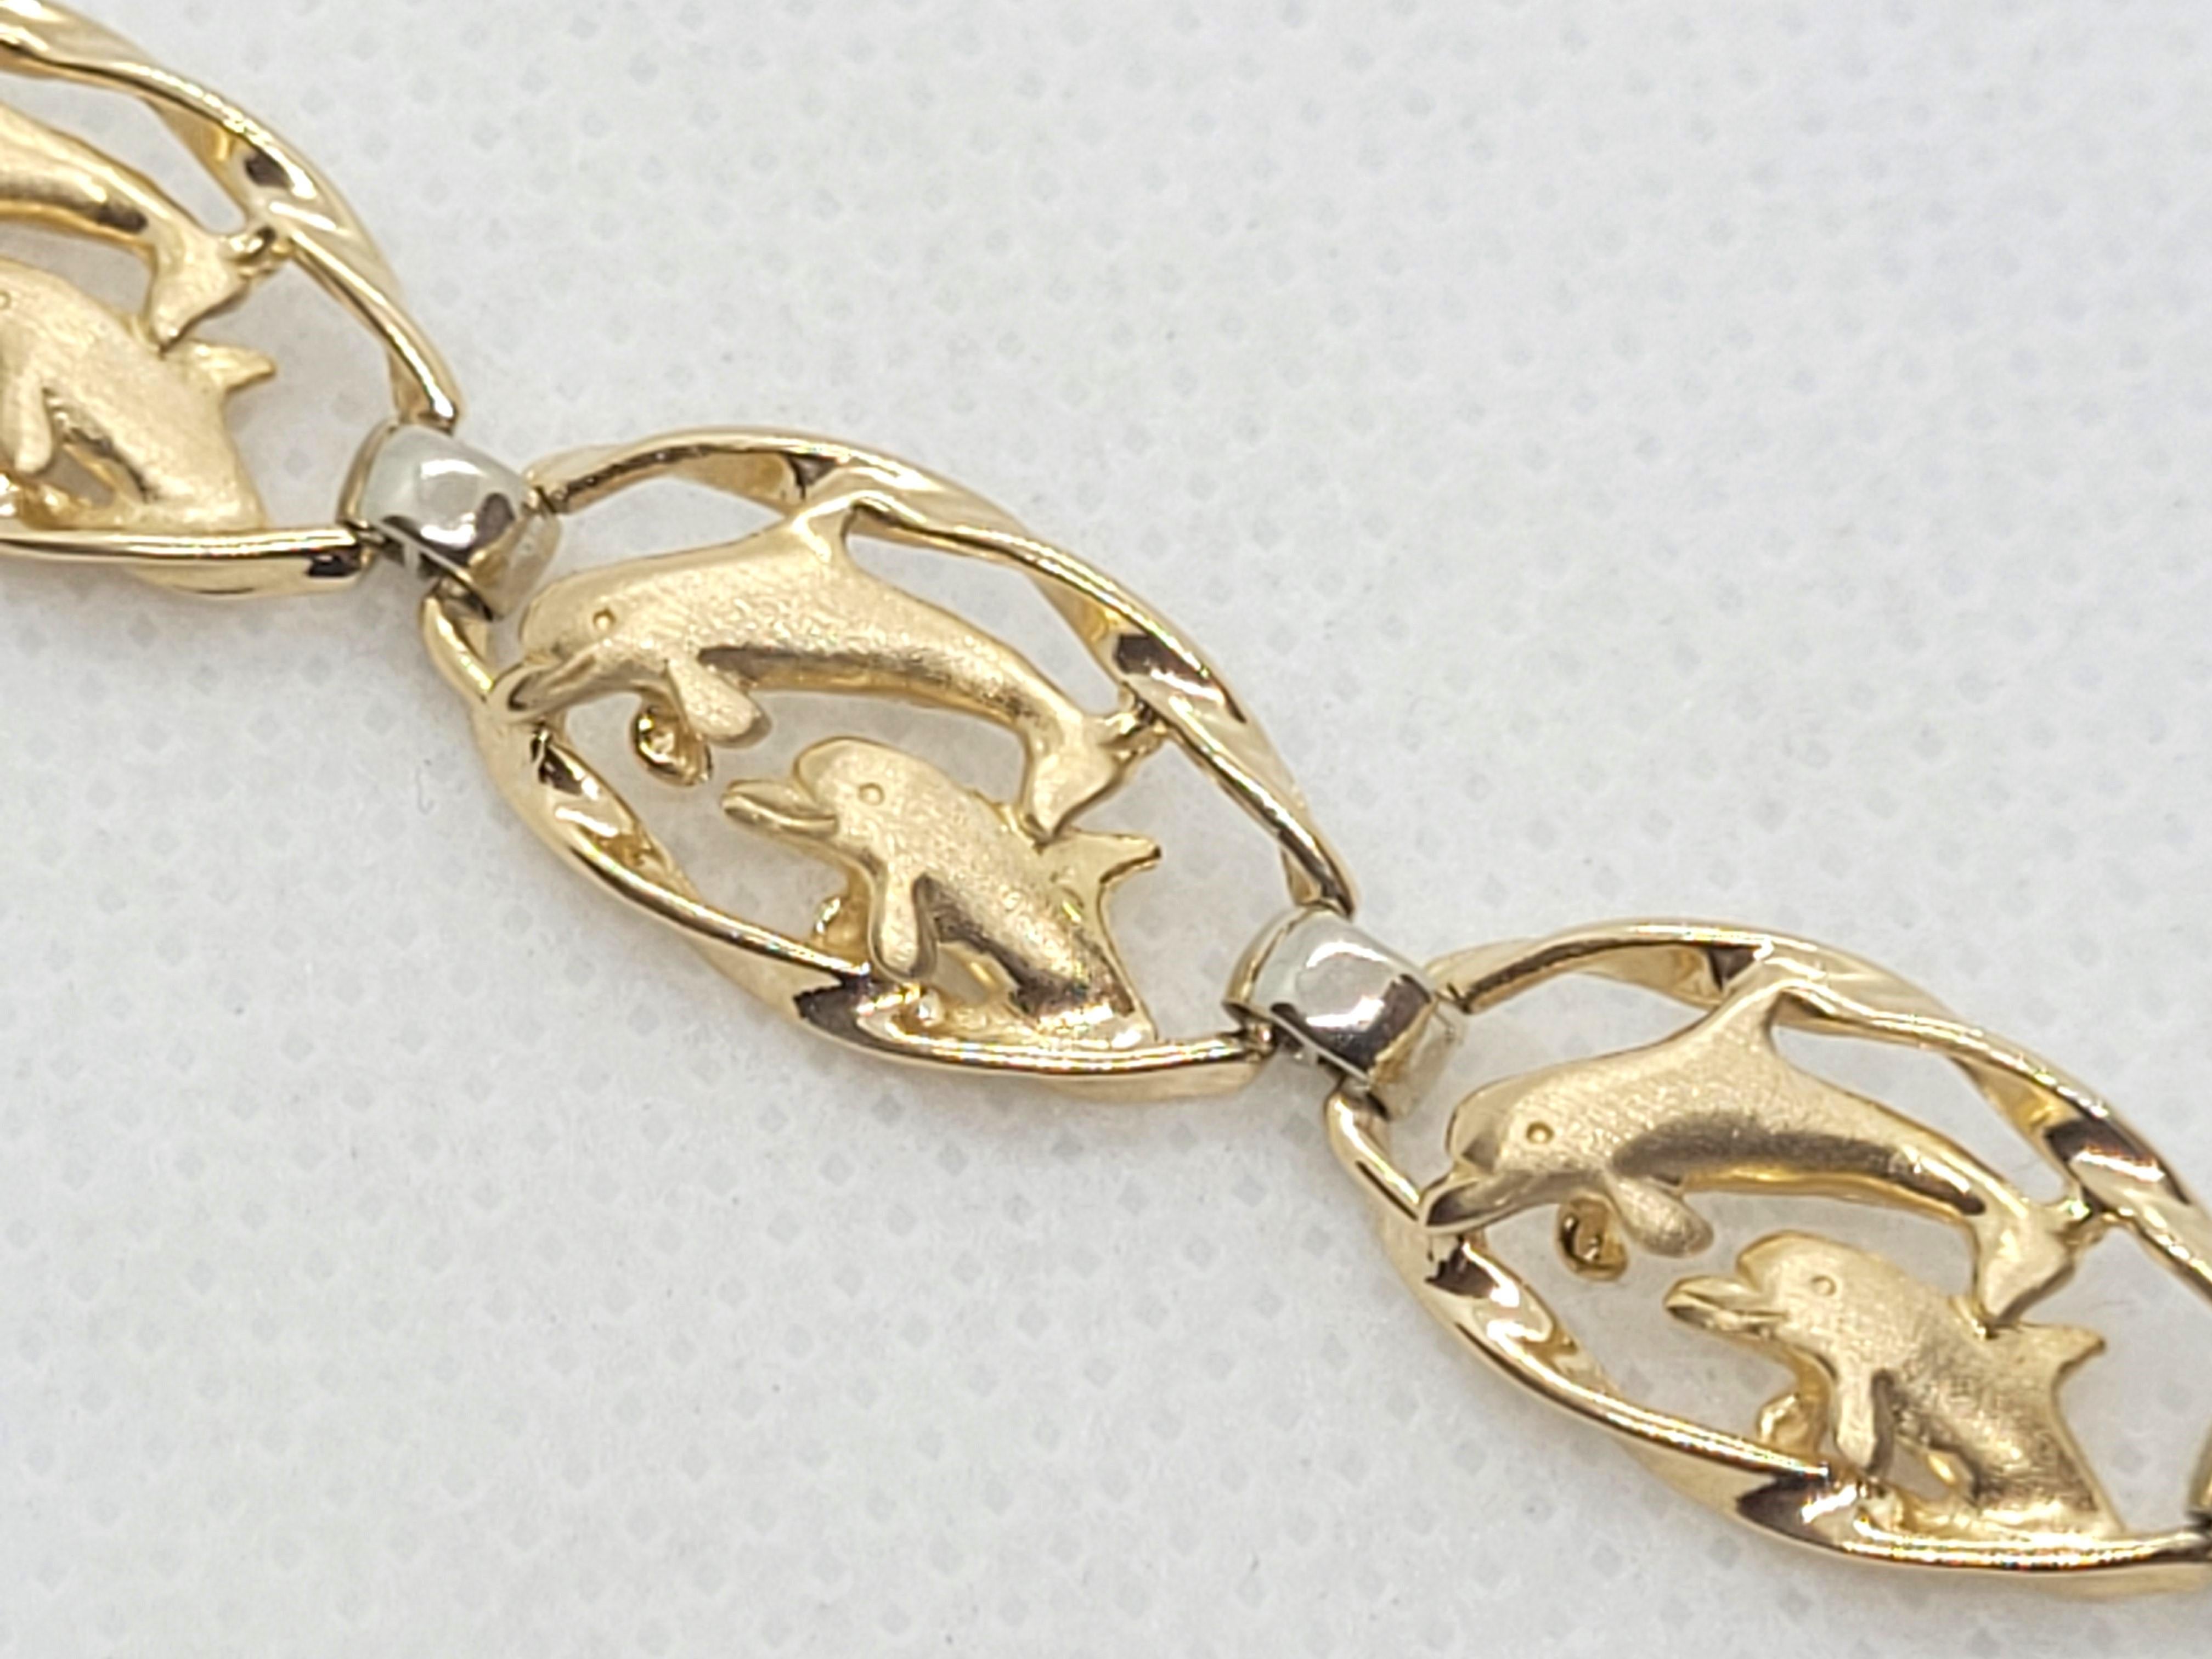 Lovely 14kt two-tone dolphin 6.5-inch bracelet, 9.5mm wide, 2.4mm thick, satin/high polish finish, 11.2 grams weight (stamped 14K), and secured with a push-in clasp w/ double safety latch. The small links are white gold and the large links have a